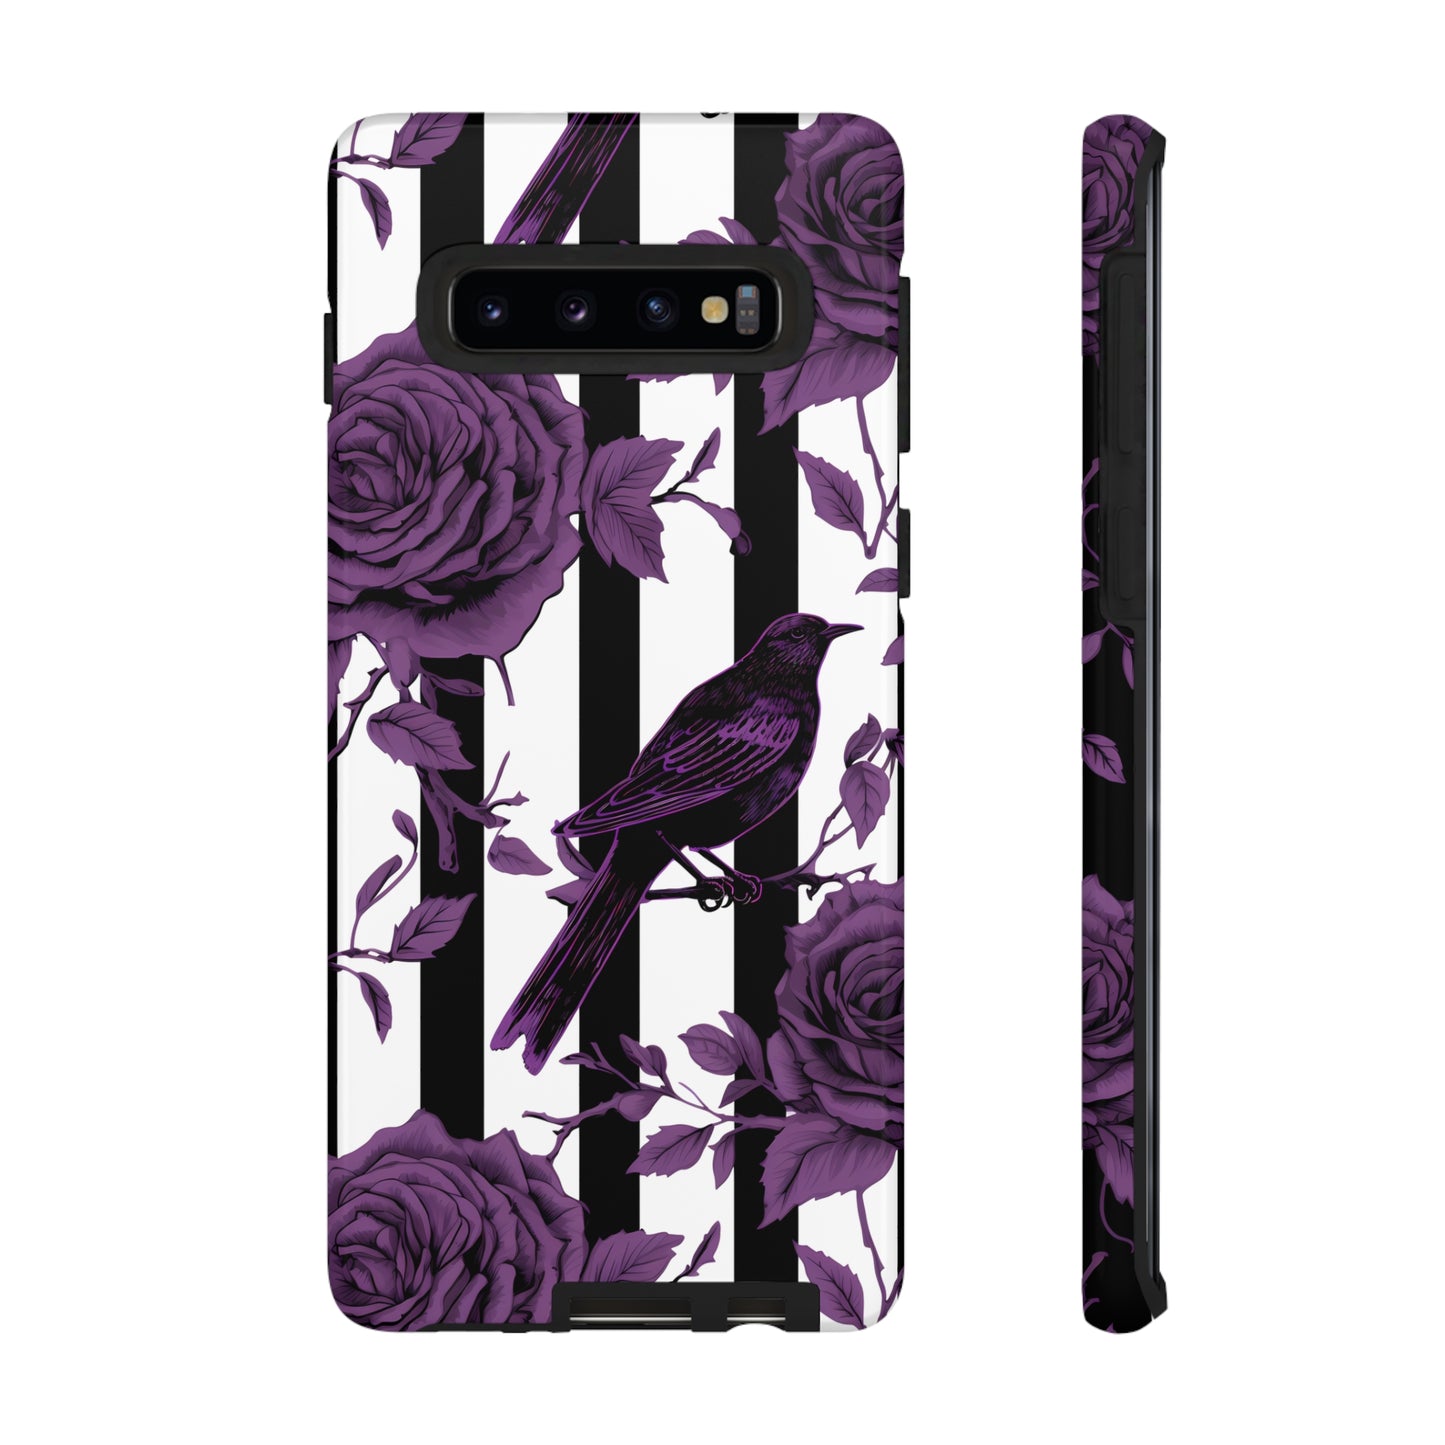 Striped Crows and Roses Tough Cases for iPhone Samsung Google PhonesPhone CaseVTZdesignsSamsung Galaxy S10GlossyAccessoriescrowsGlossy